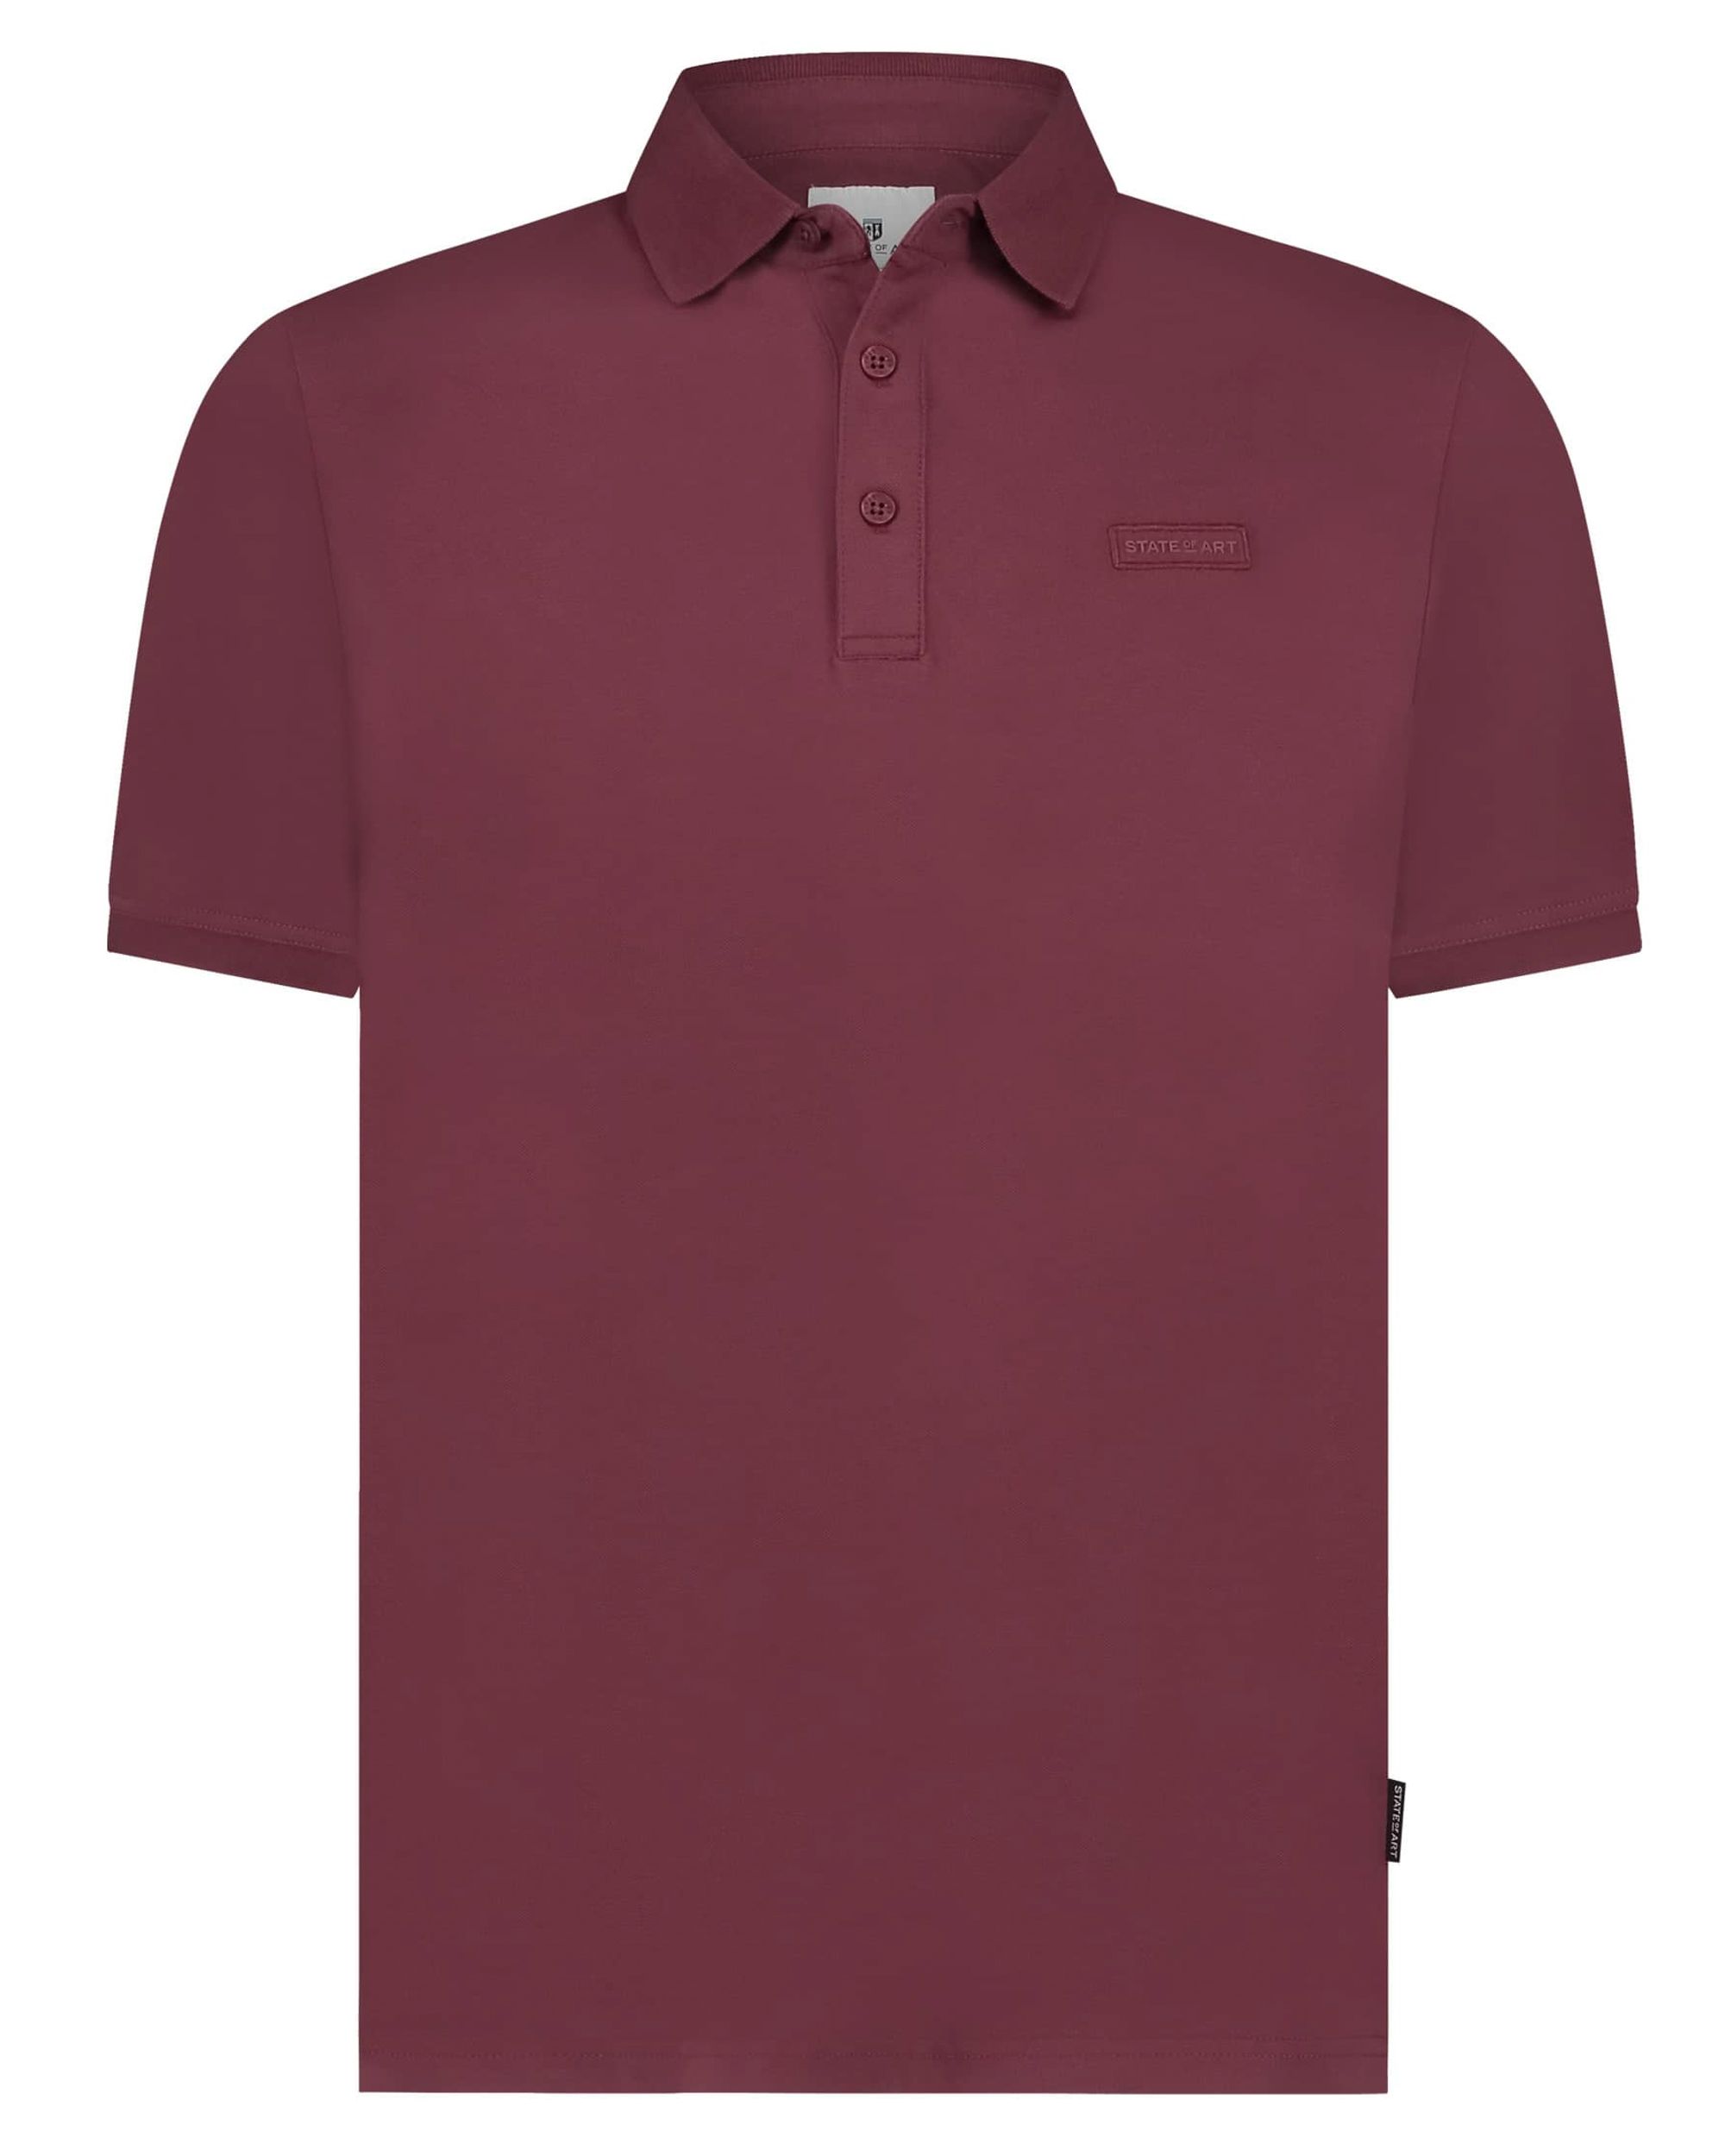 State of Art Polo KM Donker rood 093440-001-4XL